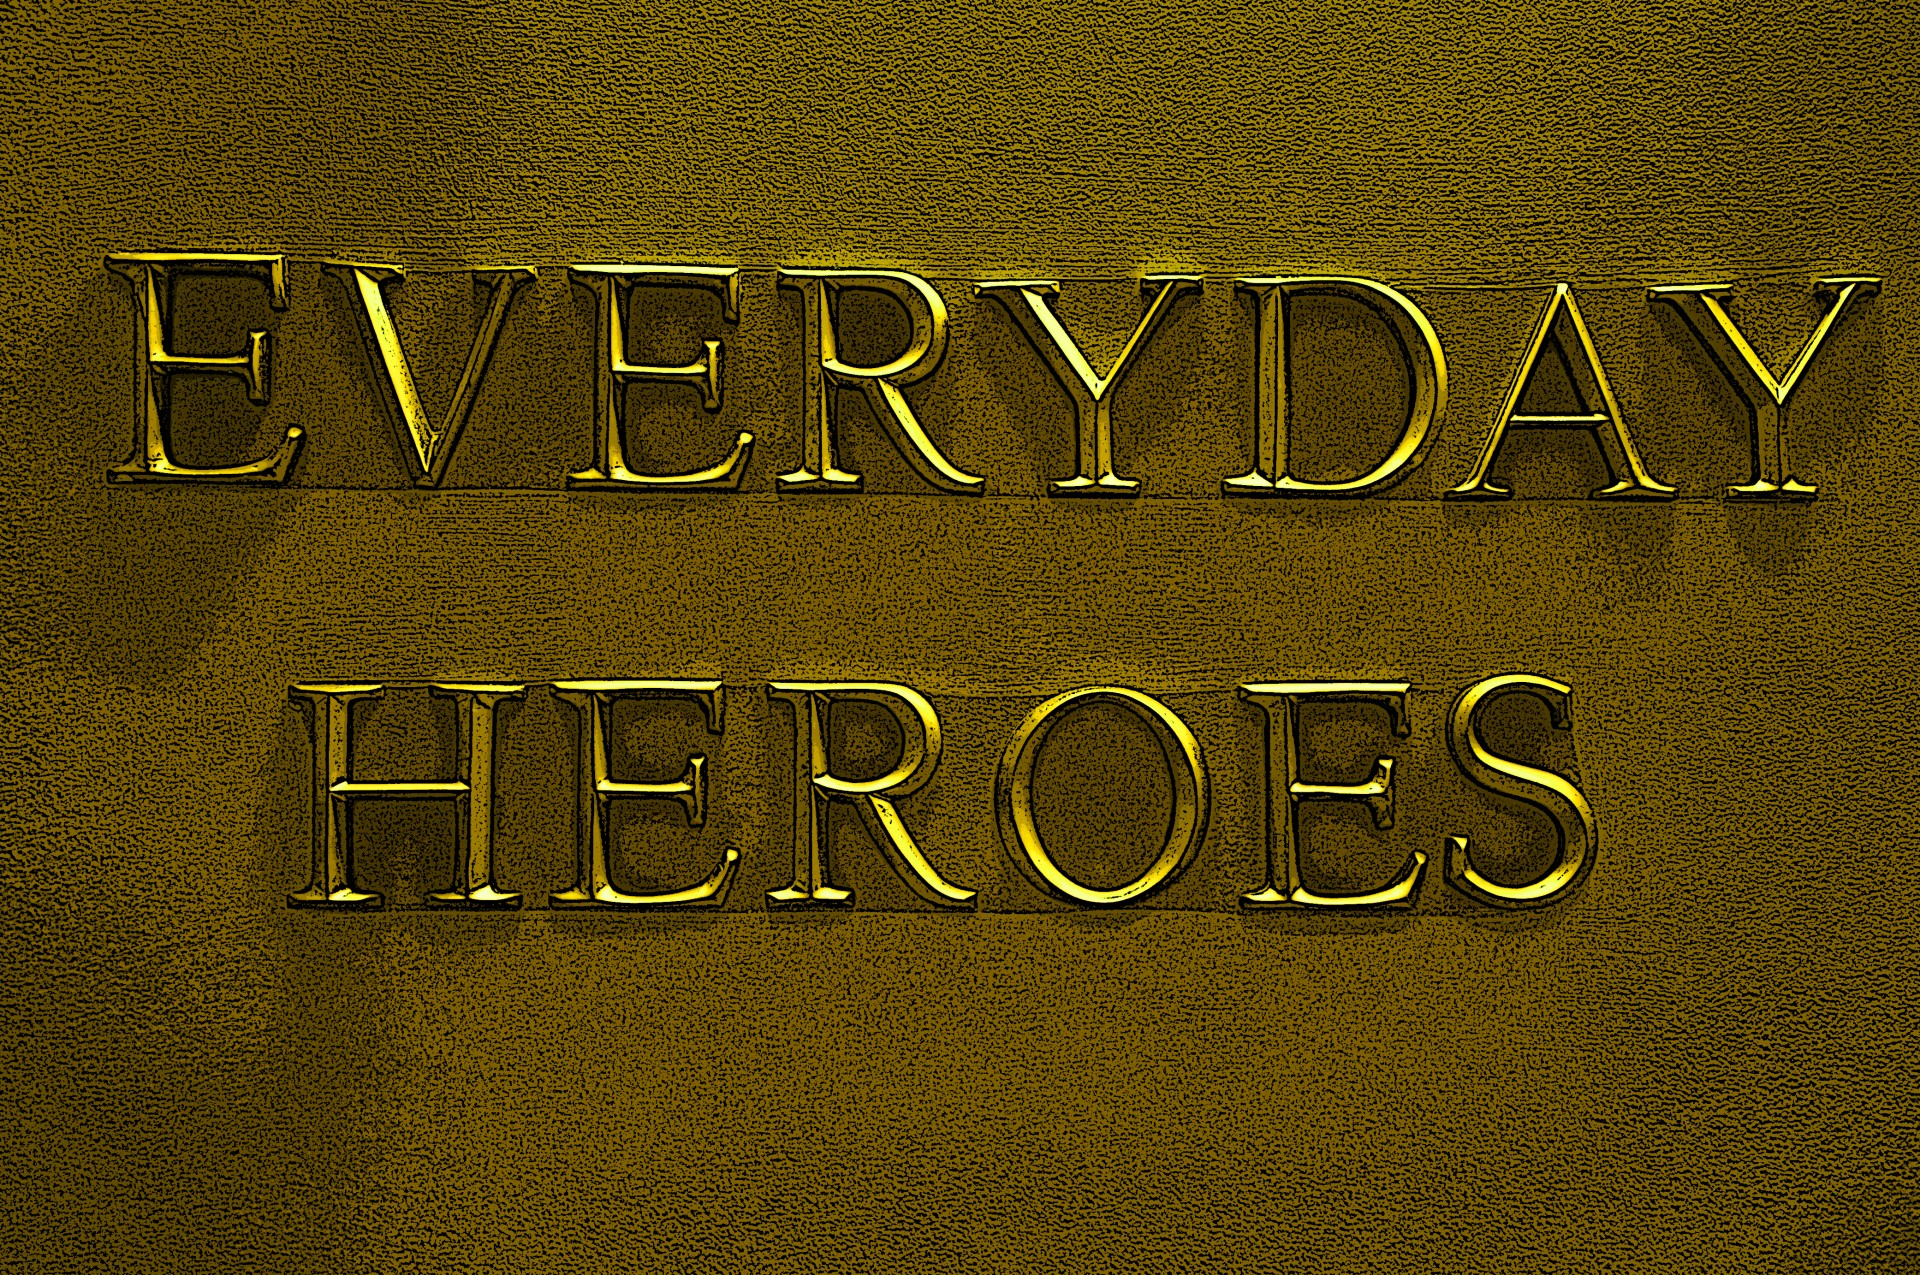 Everyday Heroes Sign Free Stock Photo - Public Domain Pictures